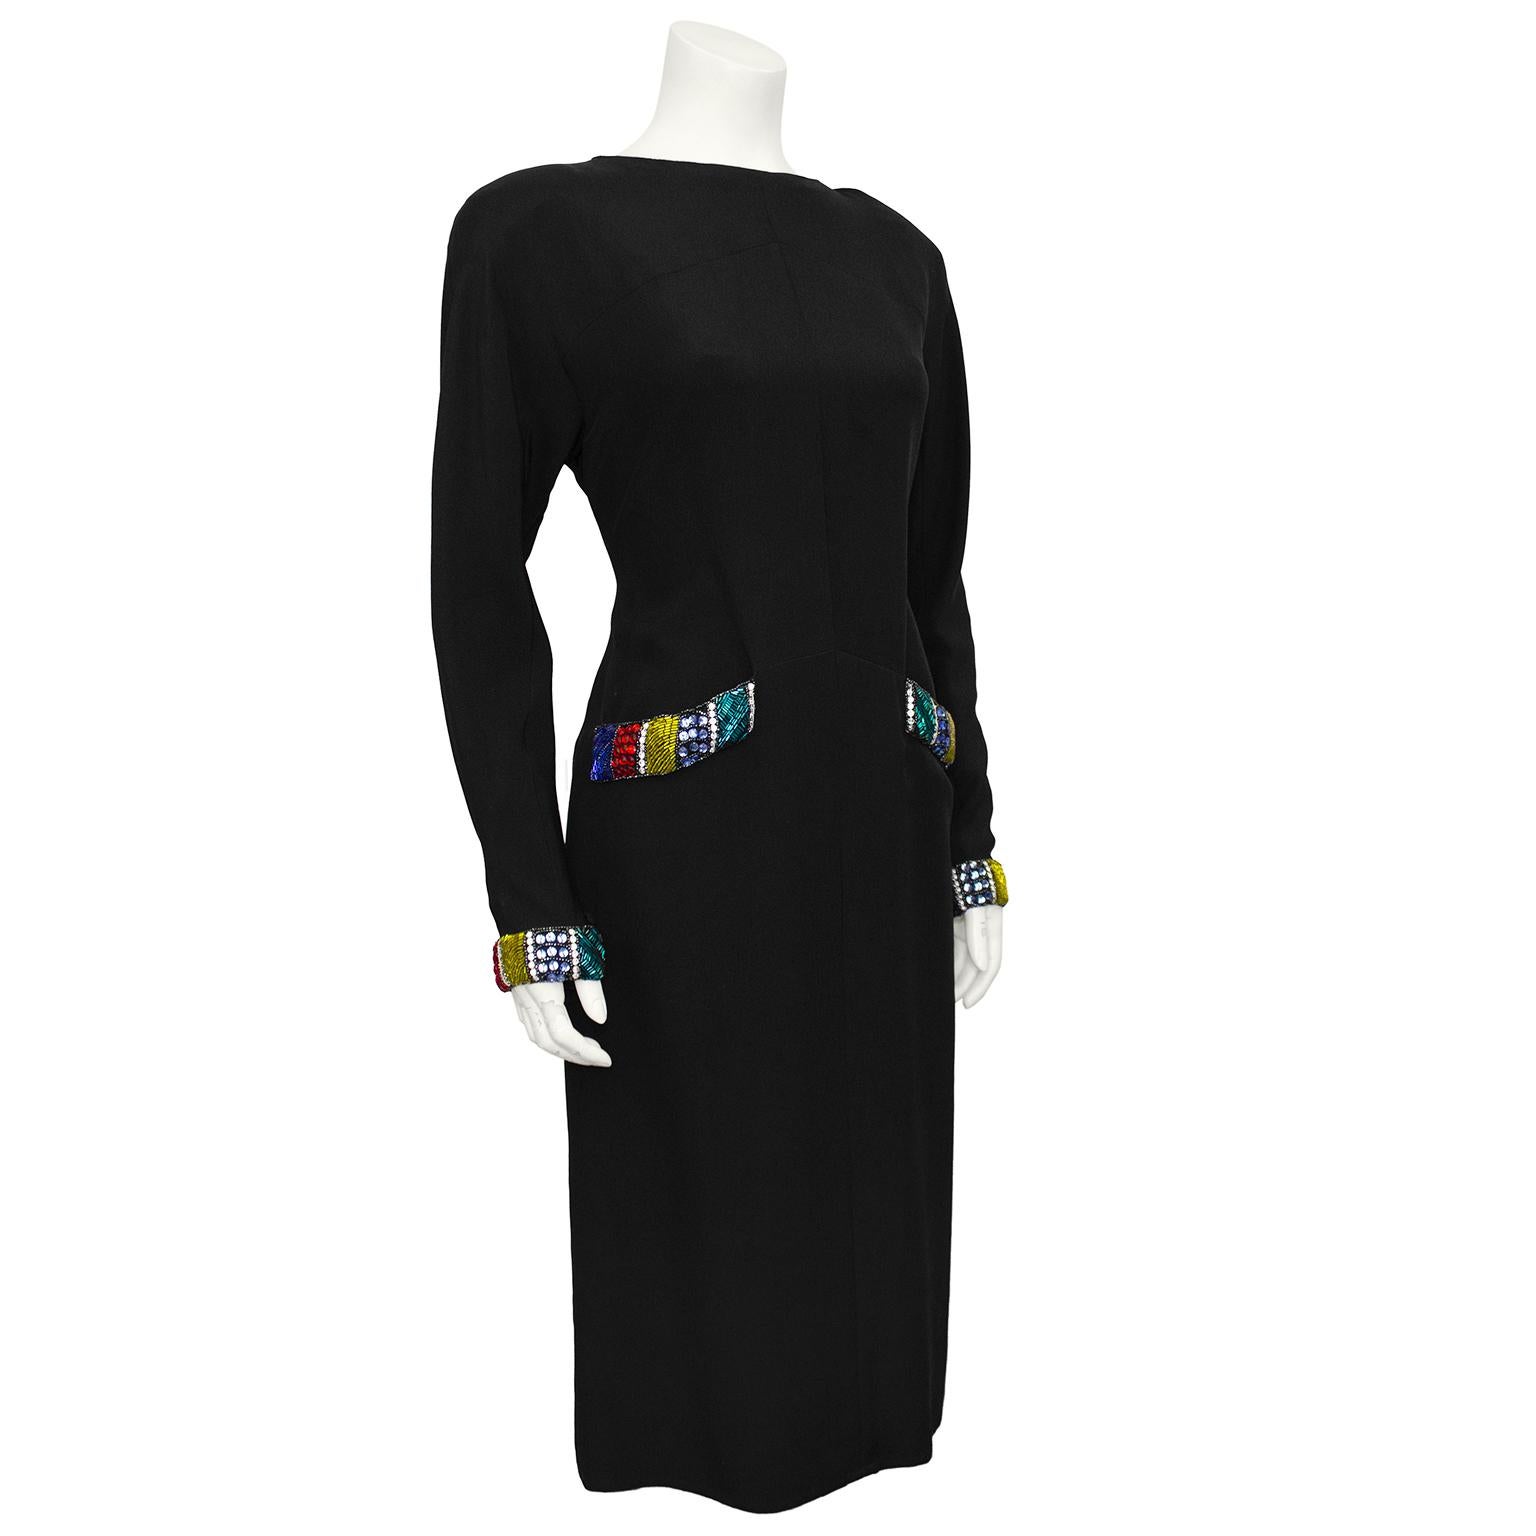 1980s Chloe dress with beaded cuffs and pockets. Designed by Karl Lagerfeld, this Chloe dress features his immaculate use of intricate beading on simple black silhouettes. The colour blocked beading is in excellent condition while the rest of the